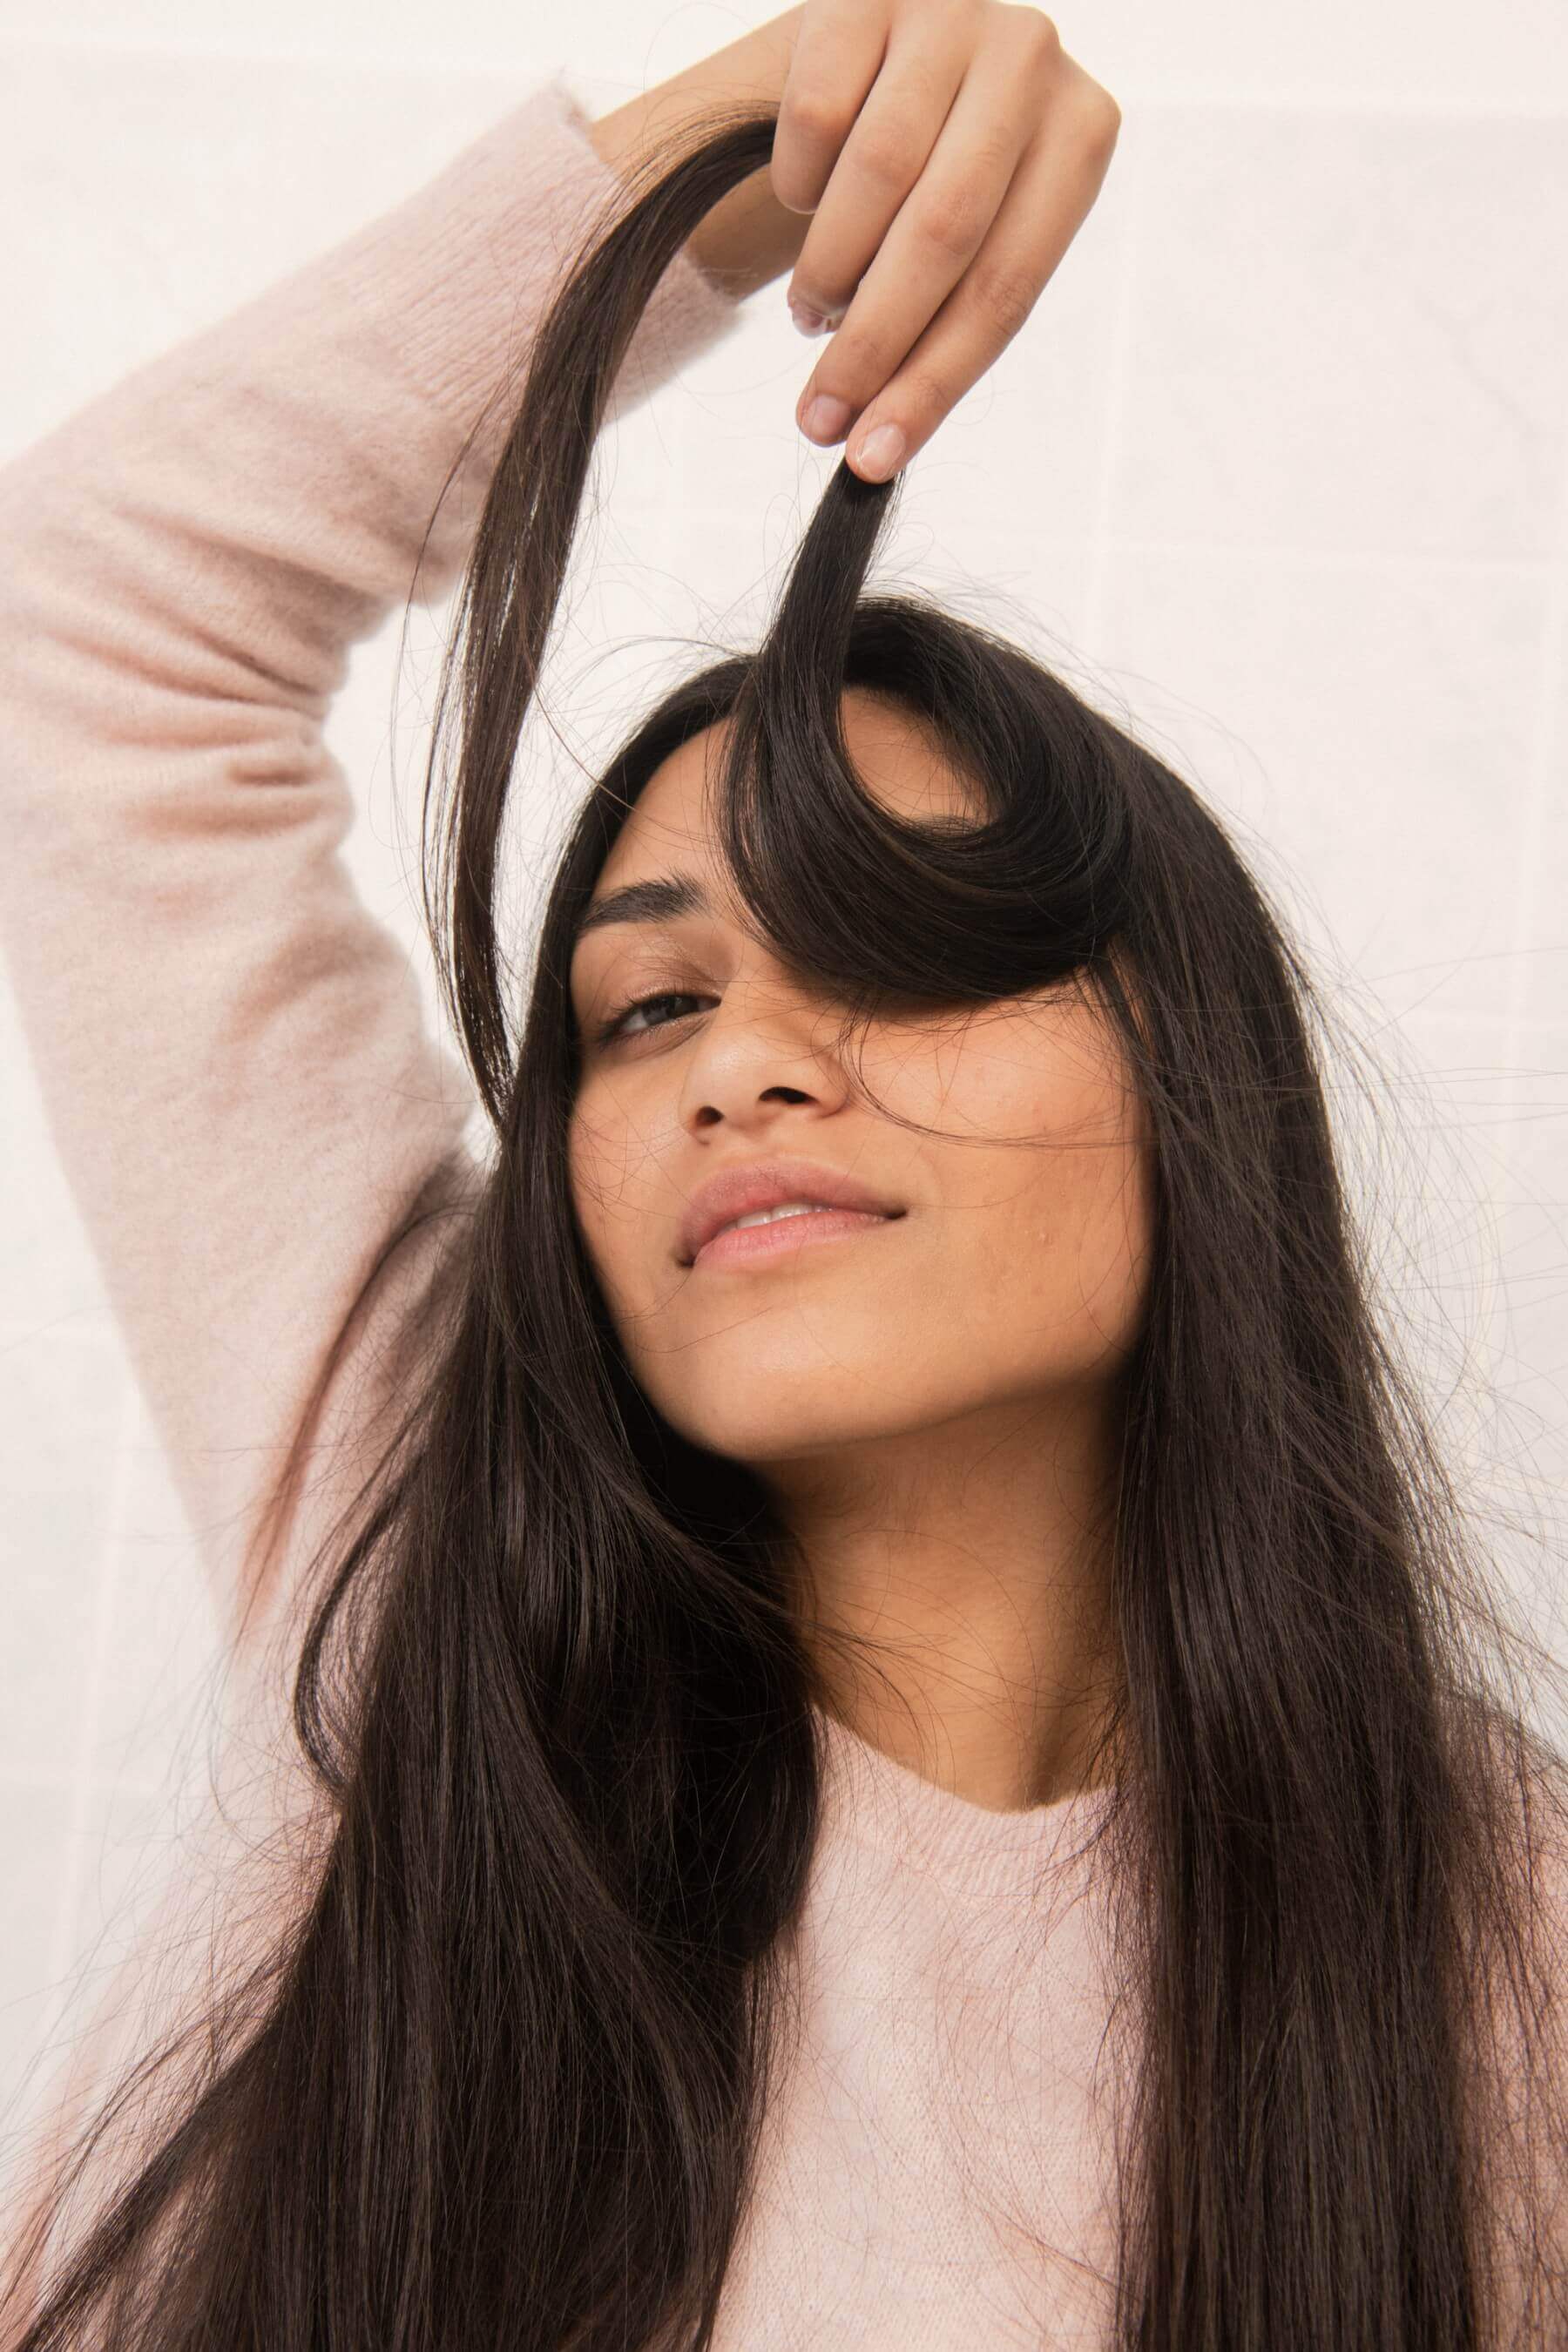 Female Hair Loss 101: Why it Happens and How to Treat It | hers